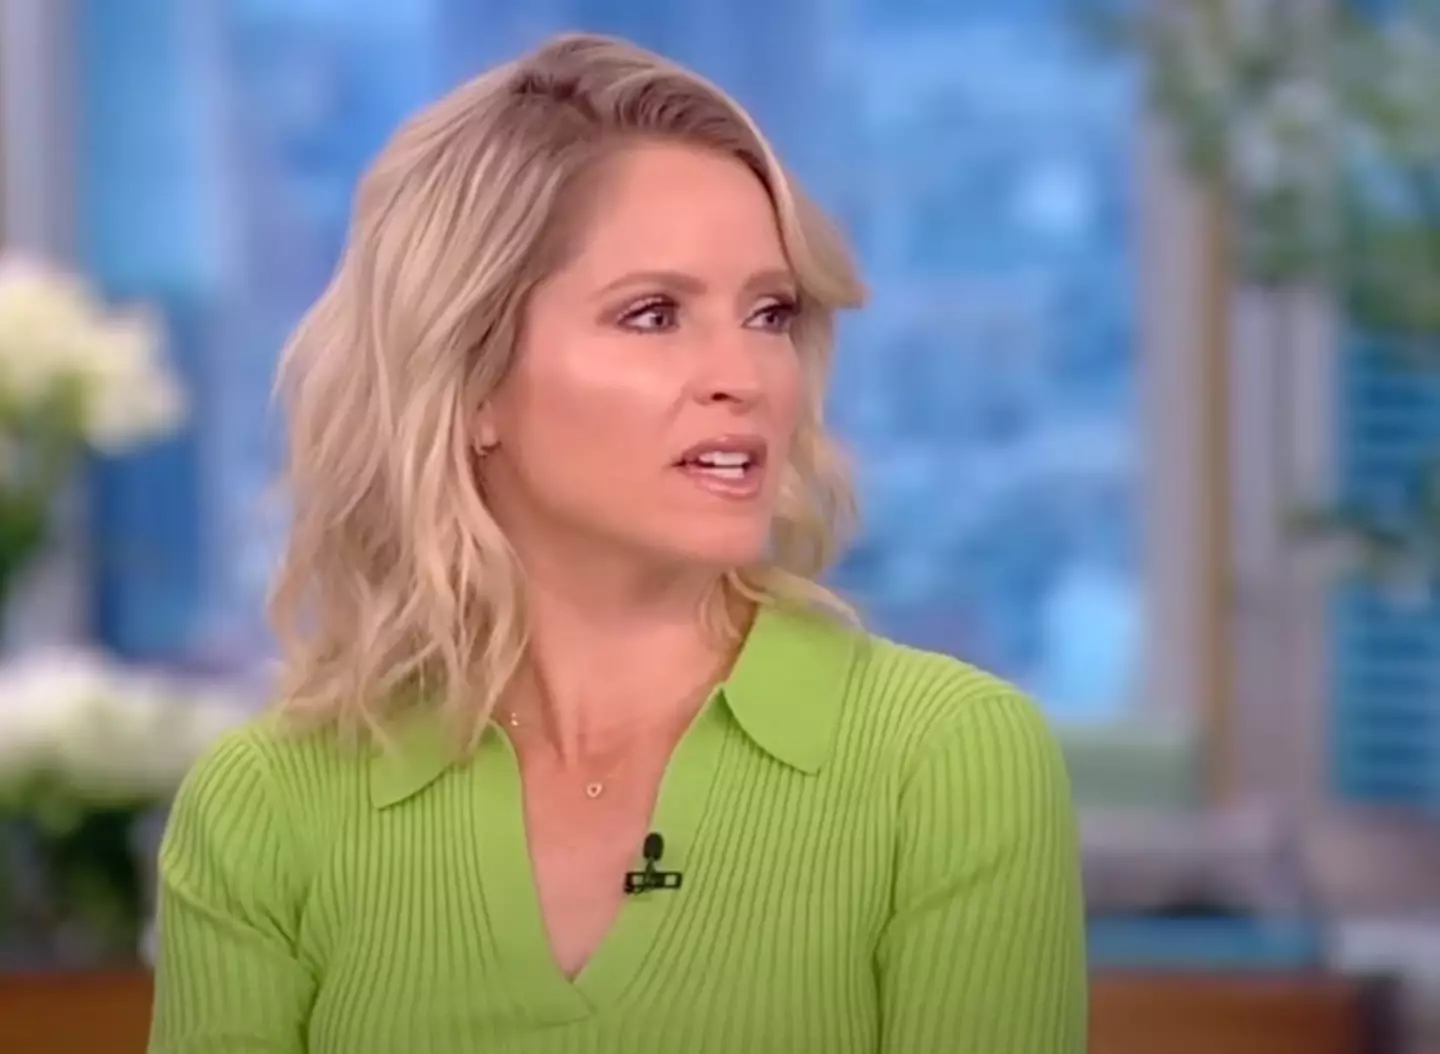 Sara Haines has revealed on a recent episode of The View that she walks around naked in front of her children.